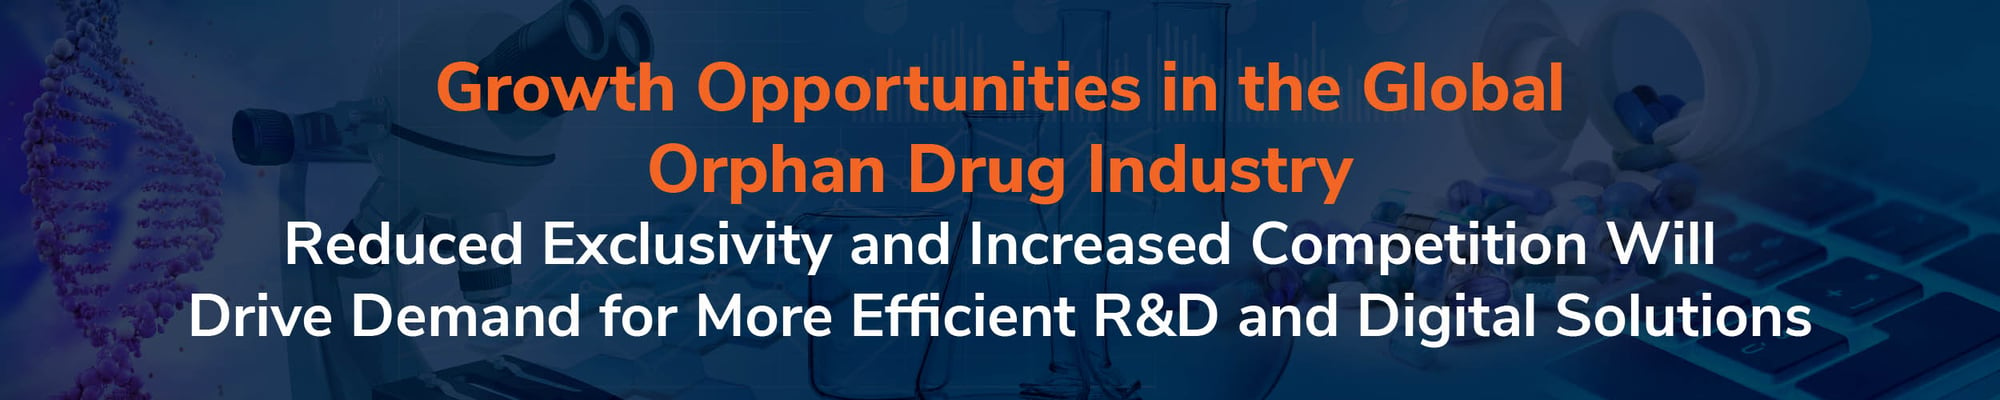 Growth Opportunities in the Global Orphan Drug Industry